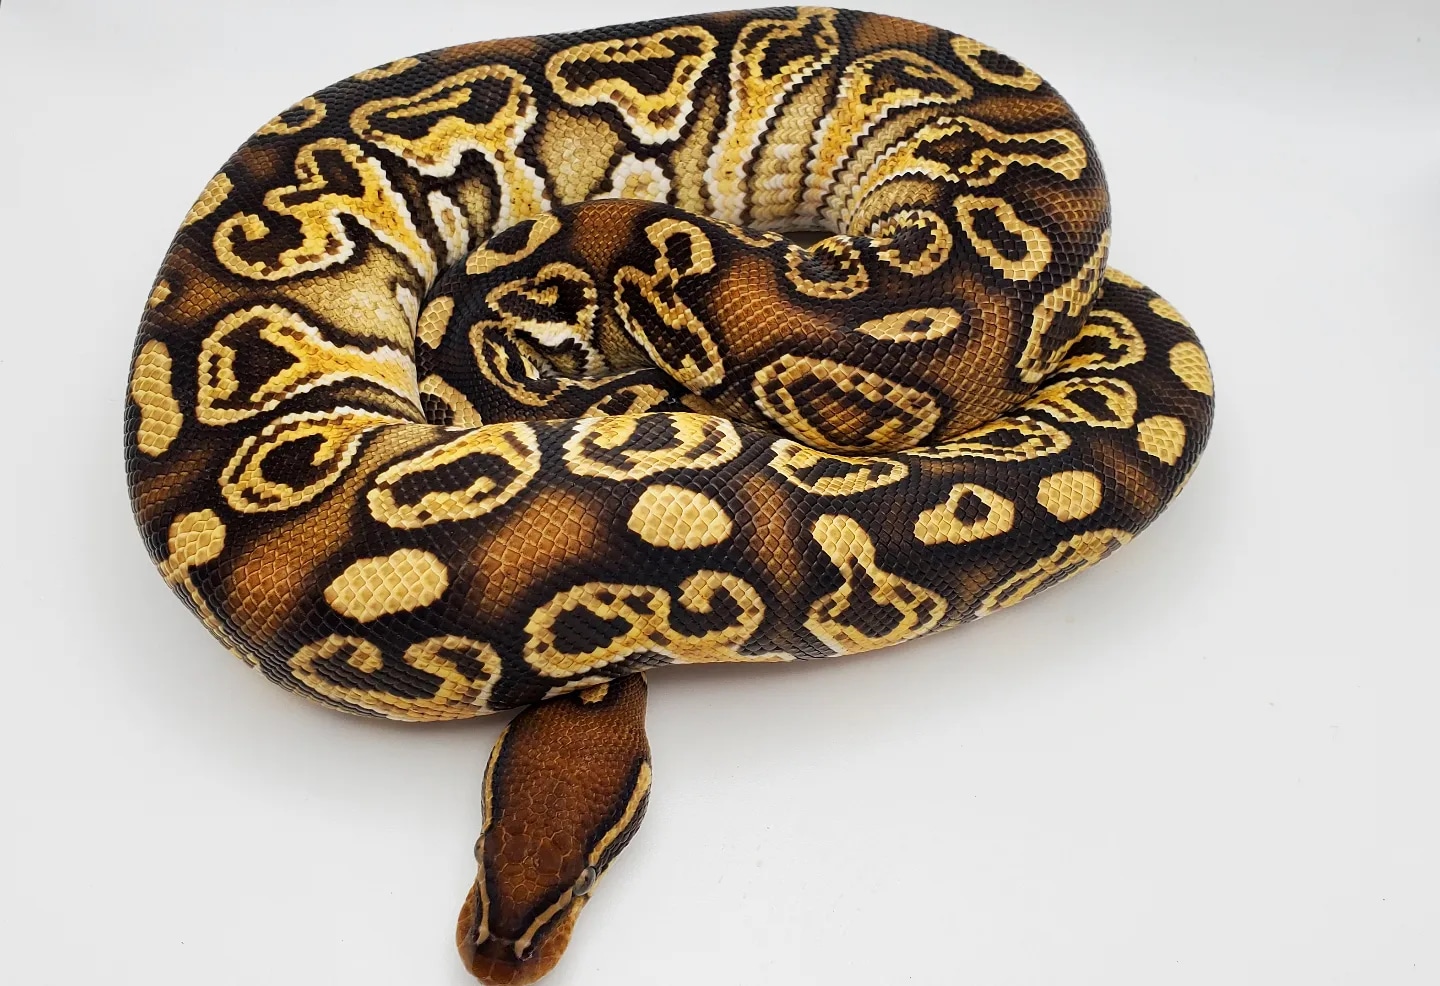 Blitzkrieg Special Ball Python by Double D Pythons